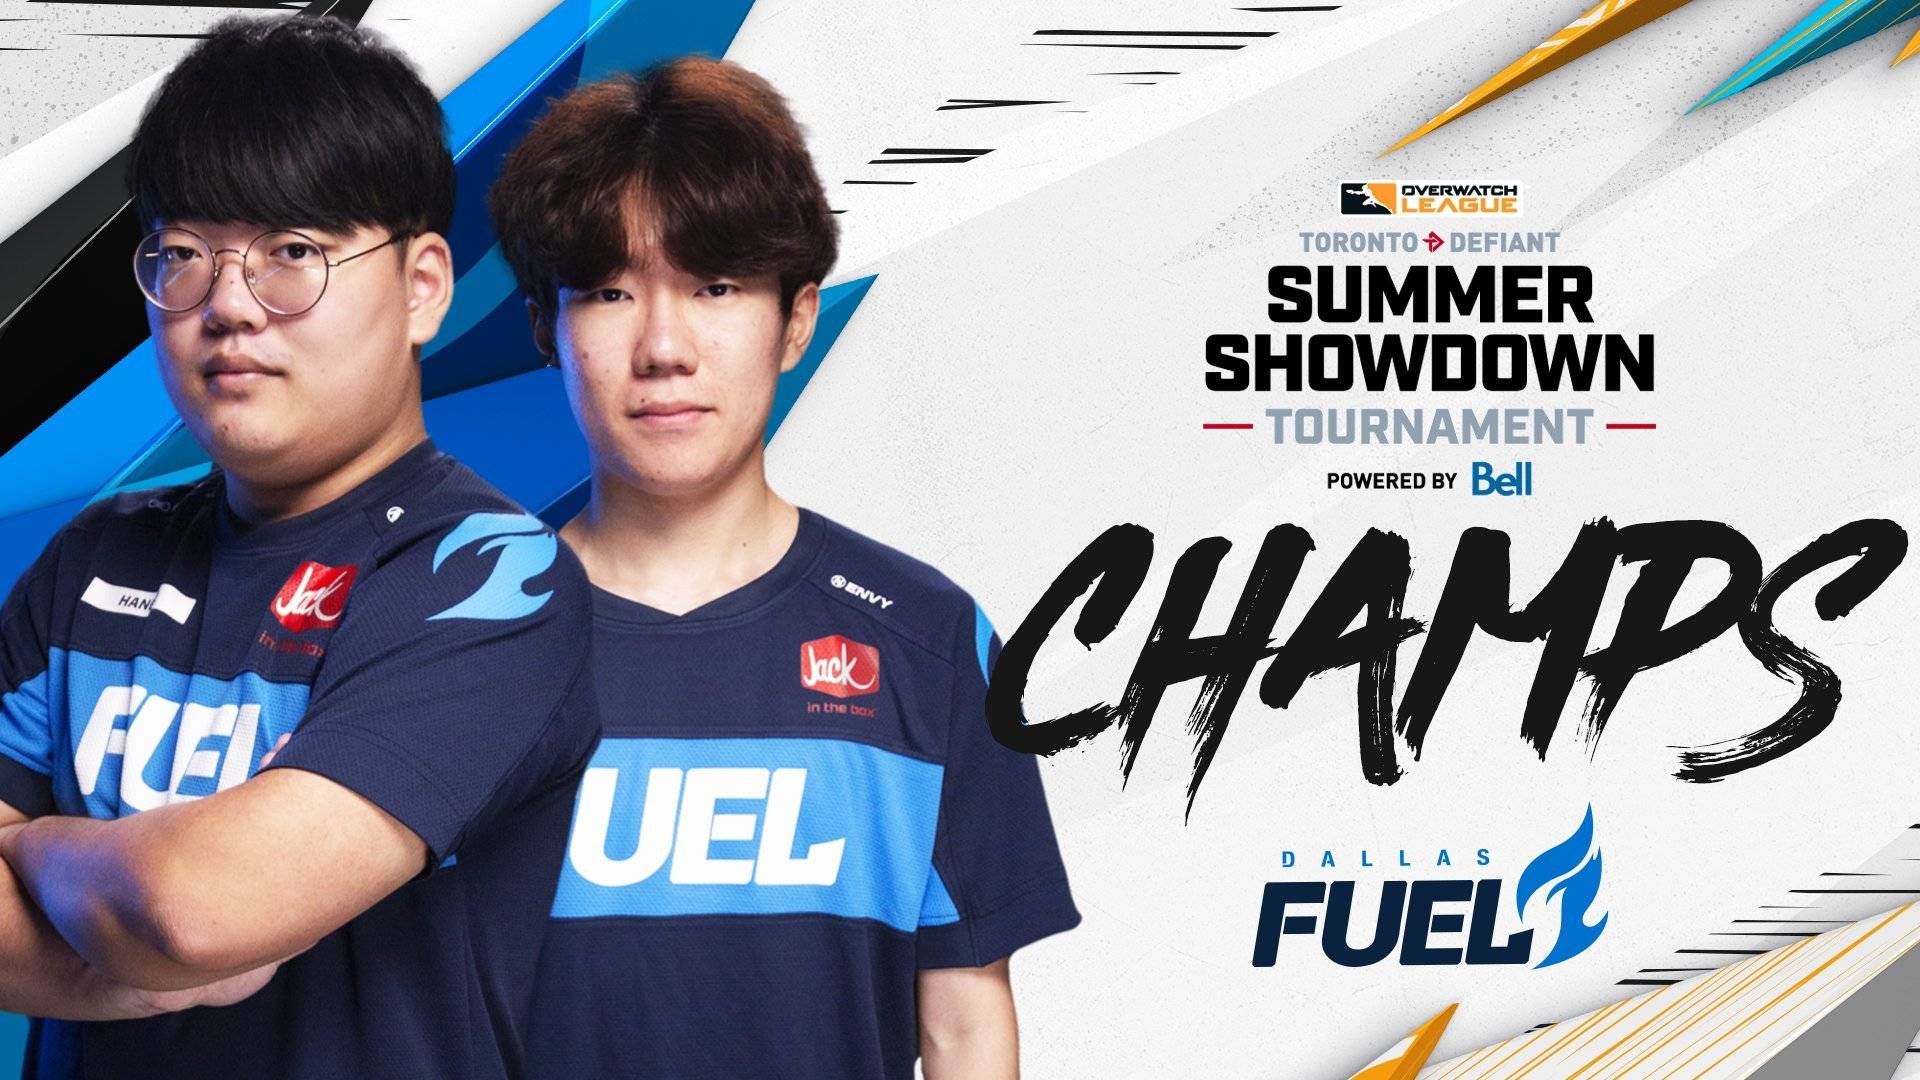 Overwatch League Championship Claimed by Dallas Fuel